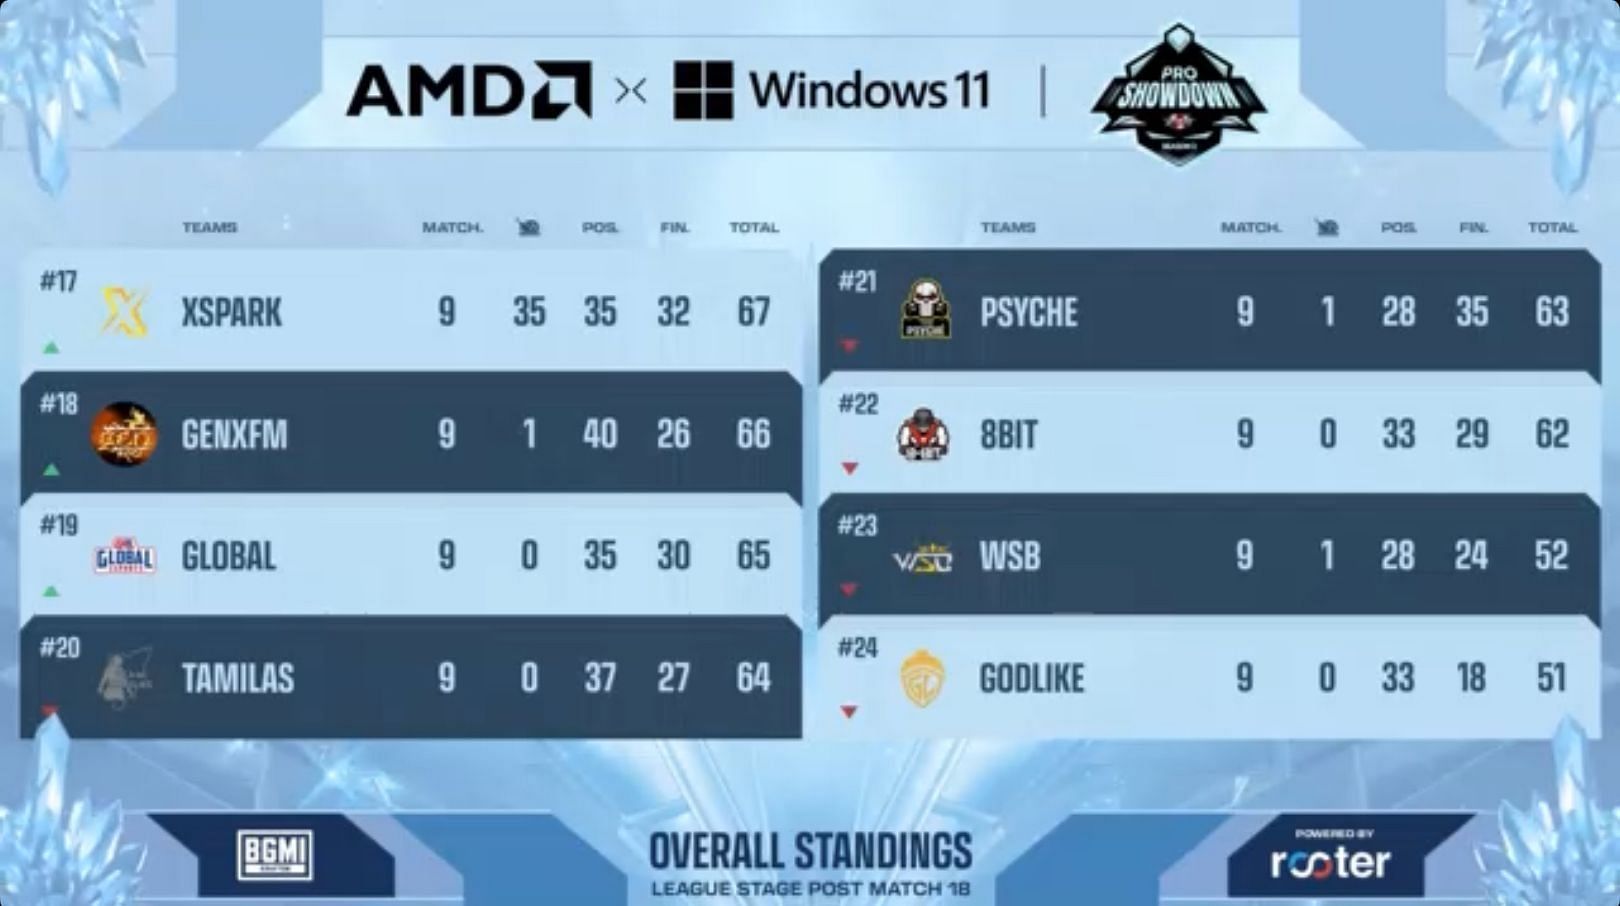 GodLike showed a good run on Day 3 compared to their matches (Image via Upthrust)